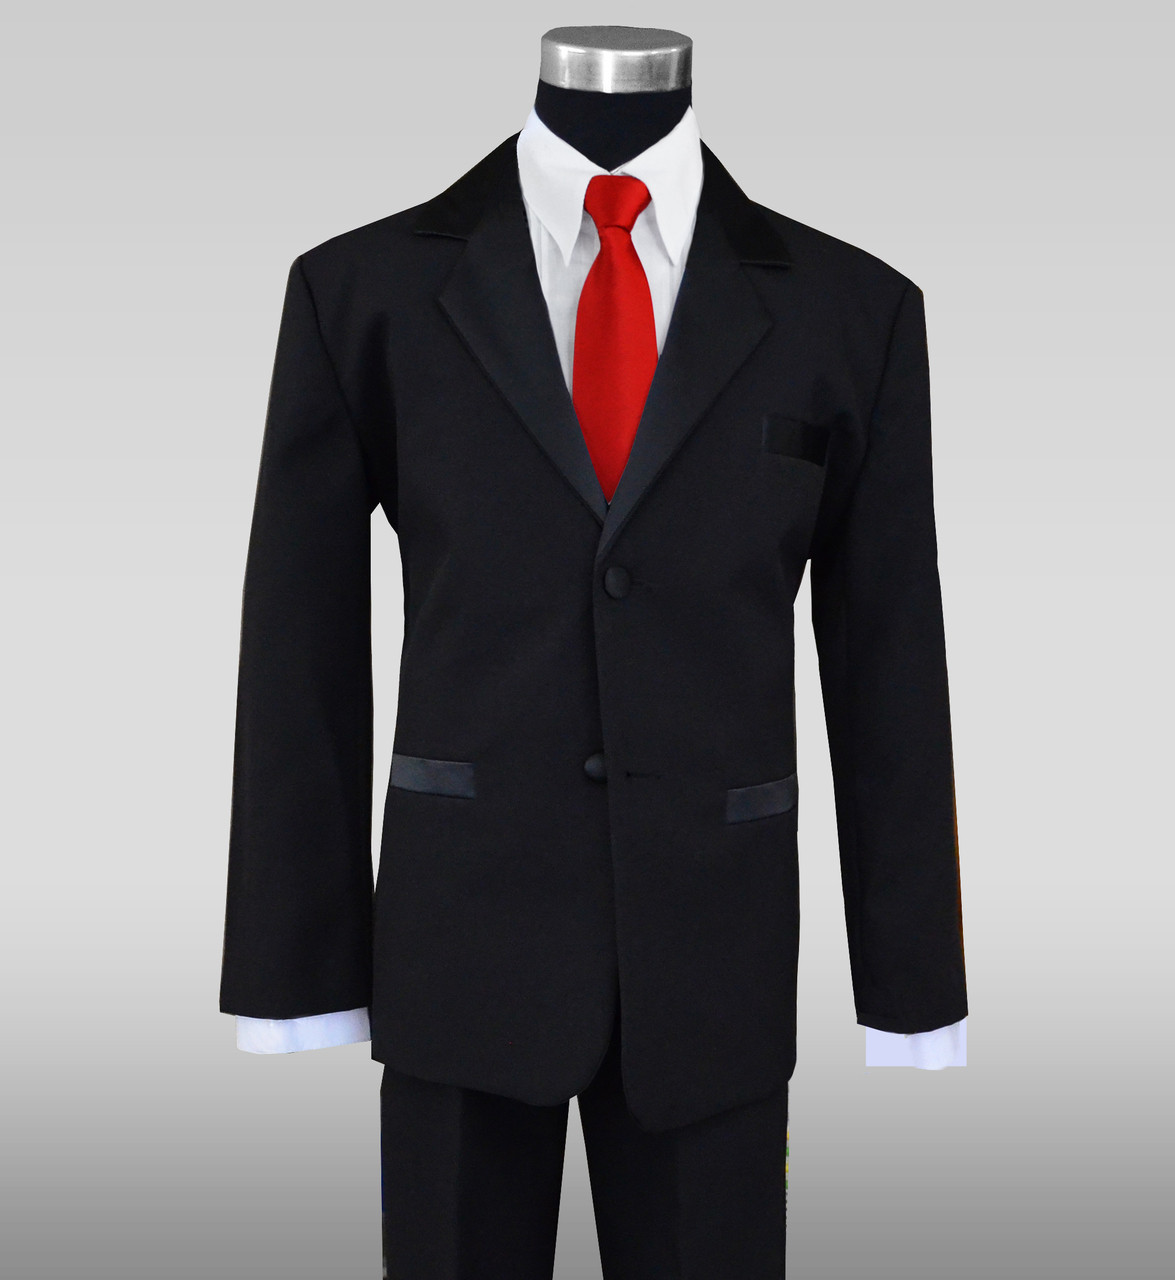 Boys Tuxedos in Black with Red Slim Bow Tie